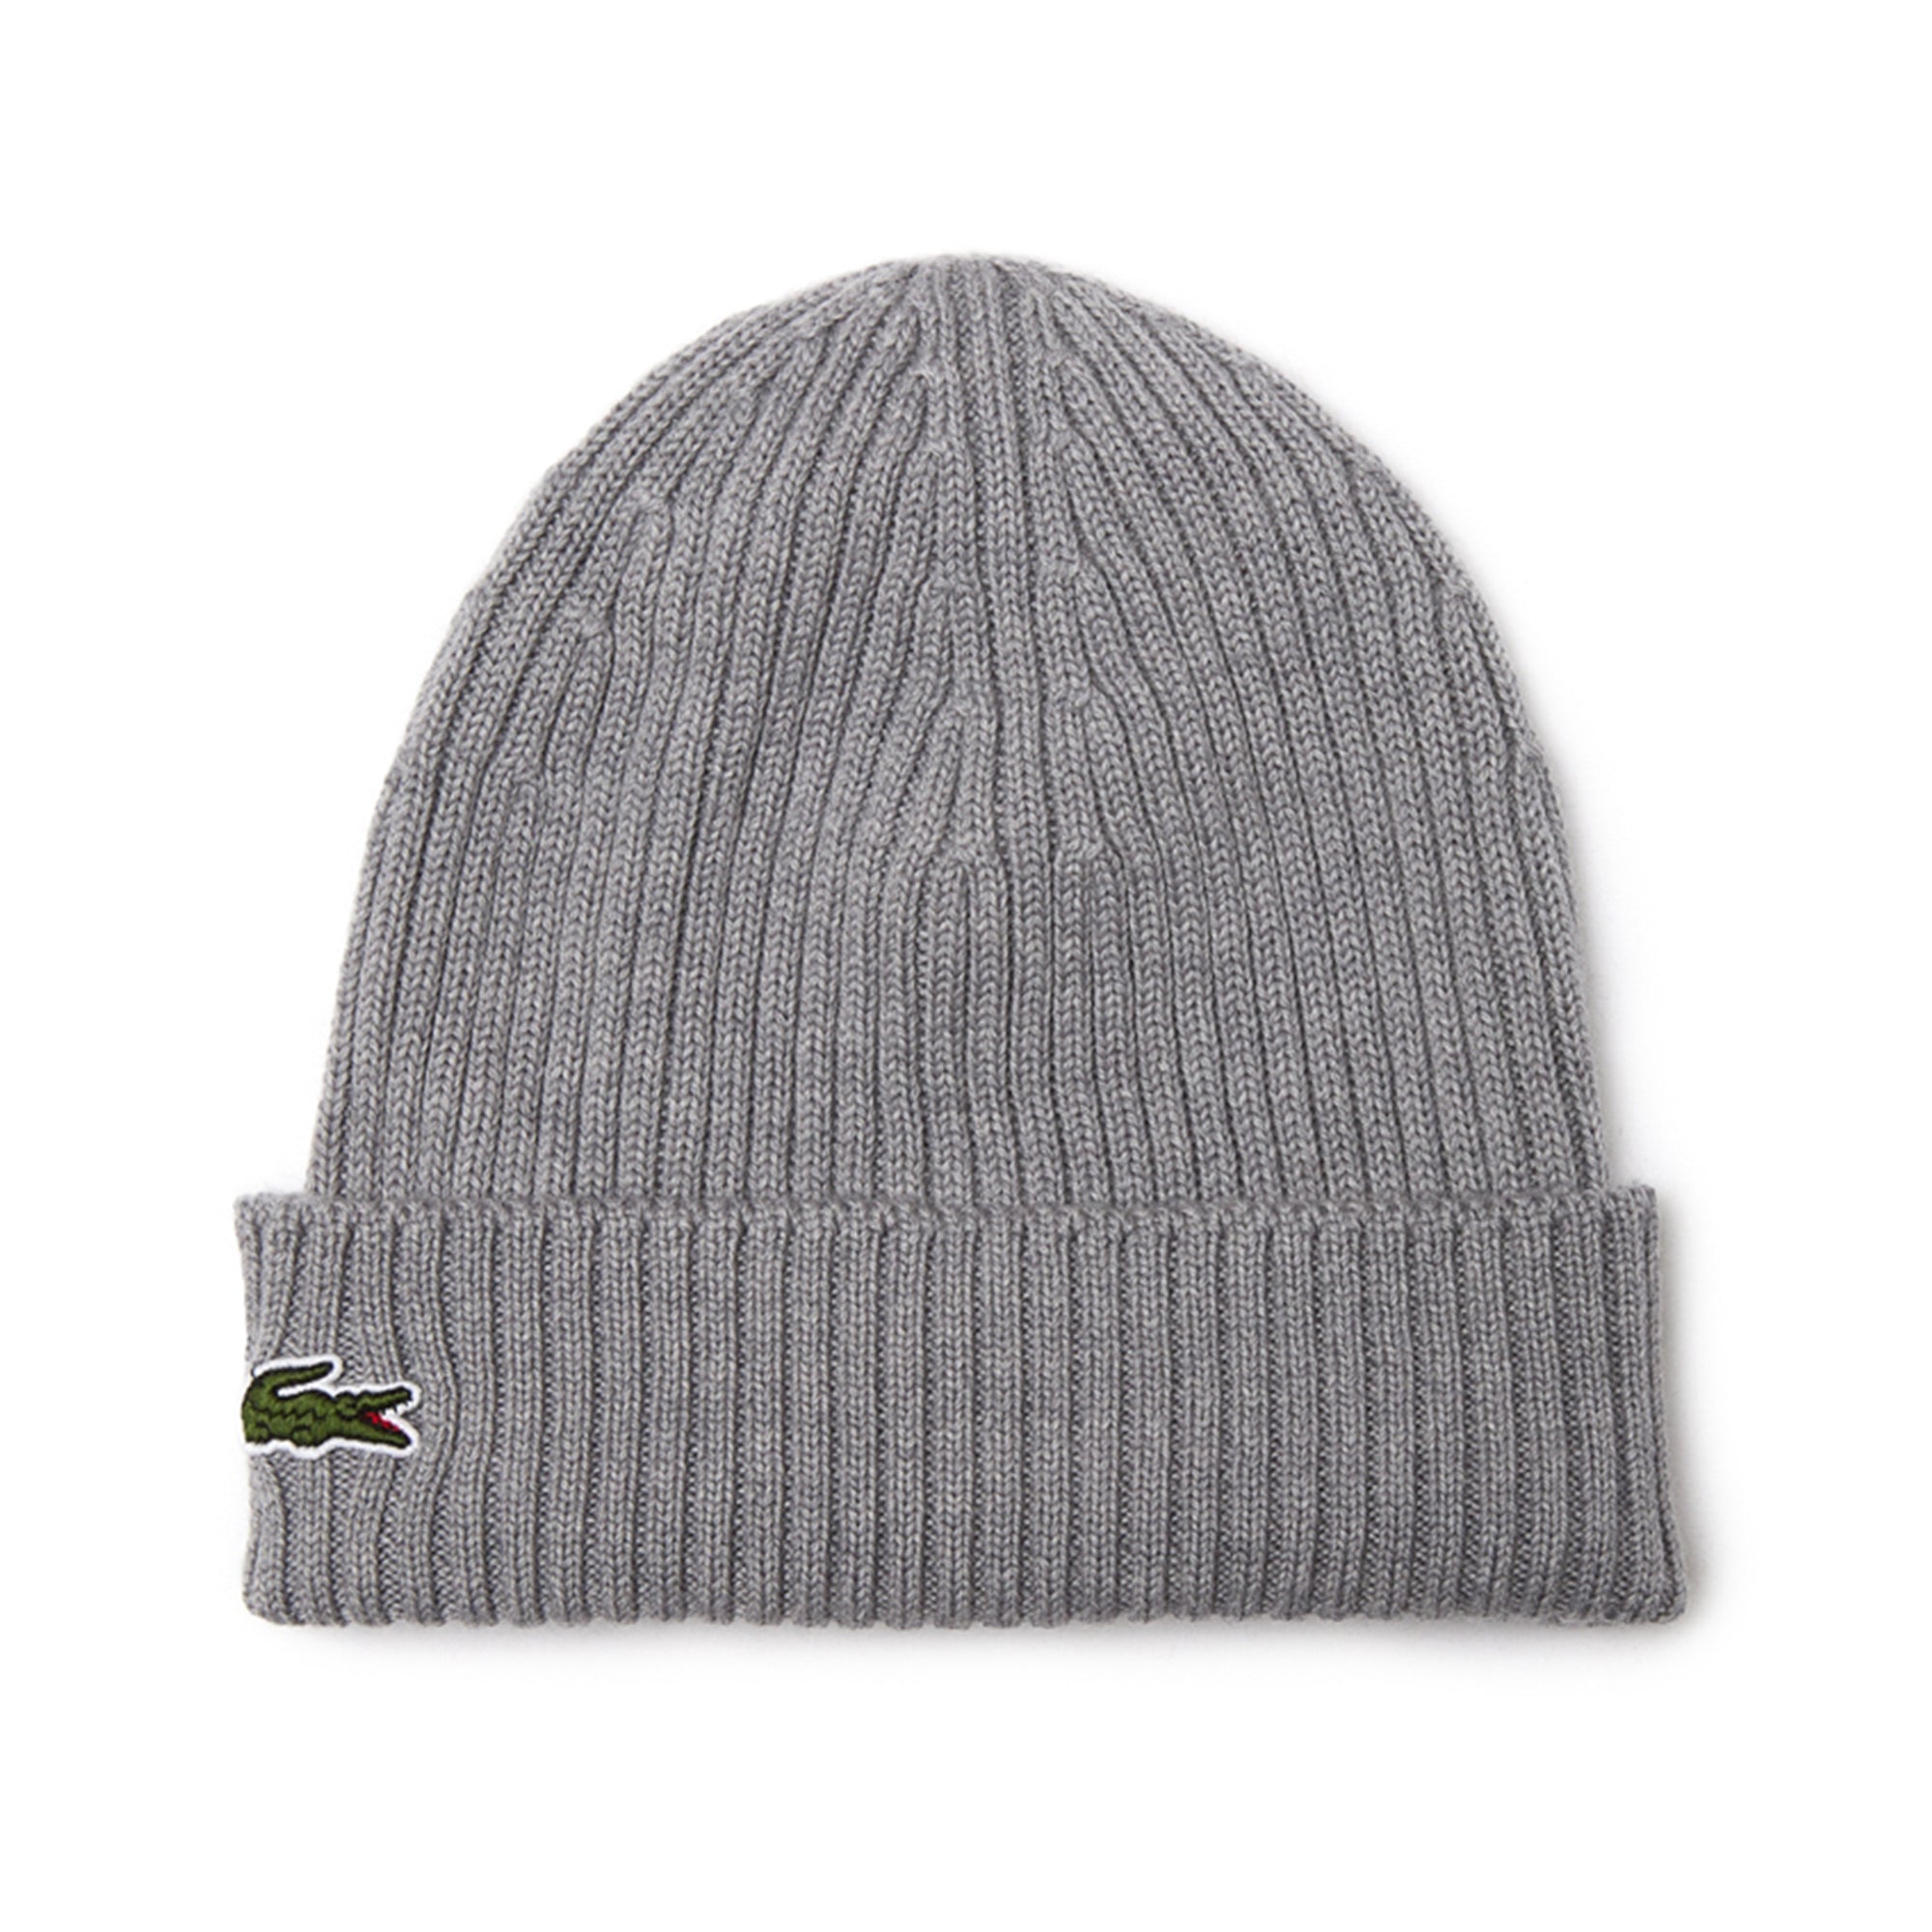 lacoste-ribbed-wool-beanie-hat-rb0001-grey-chine-yrd